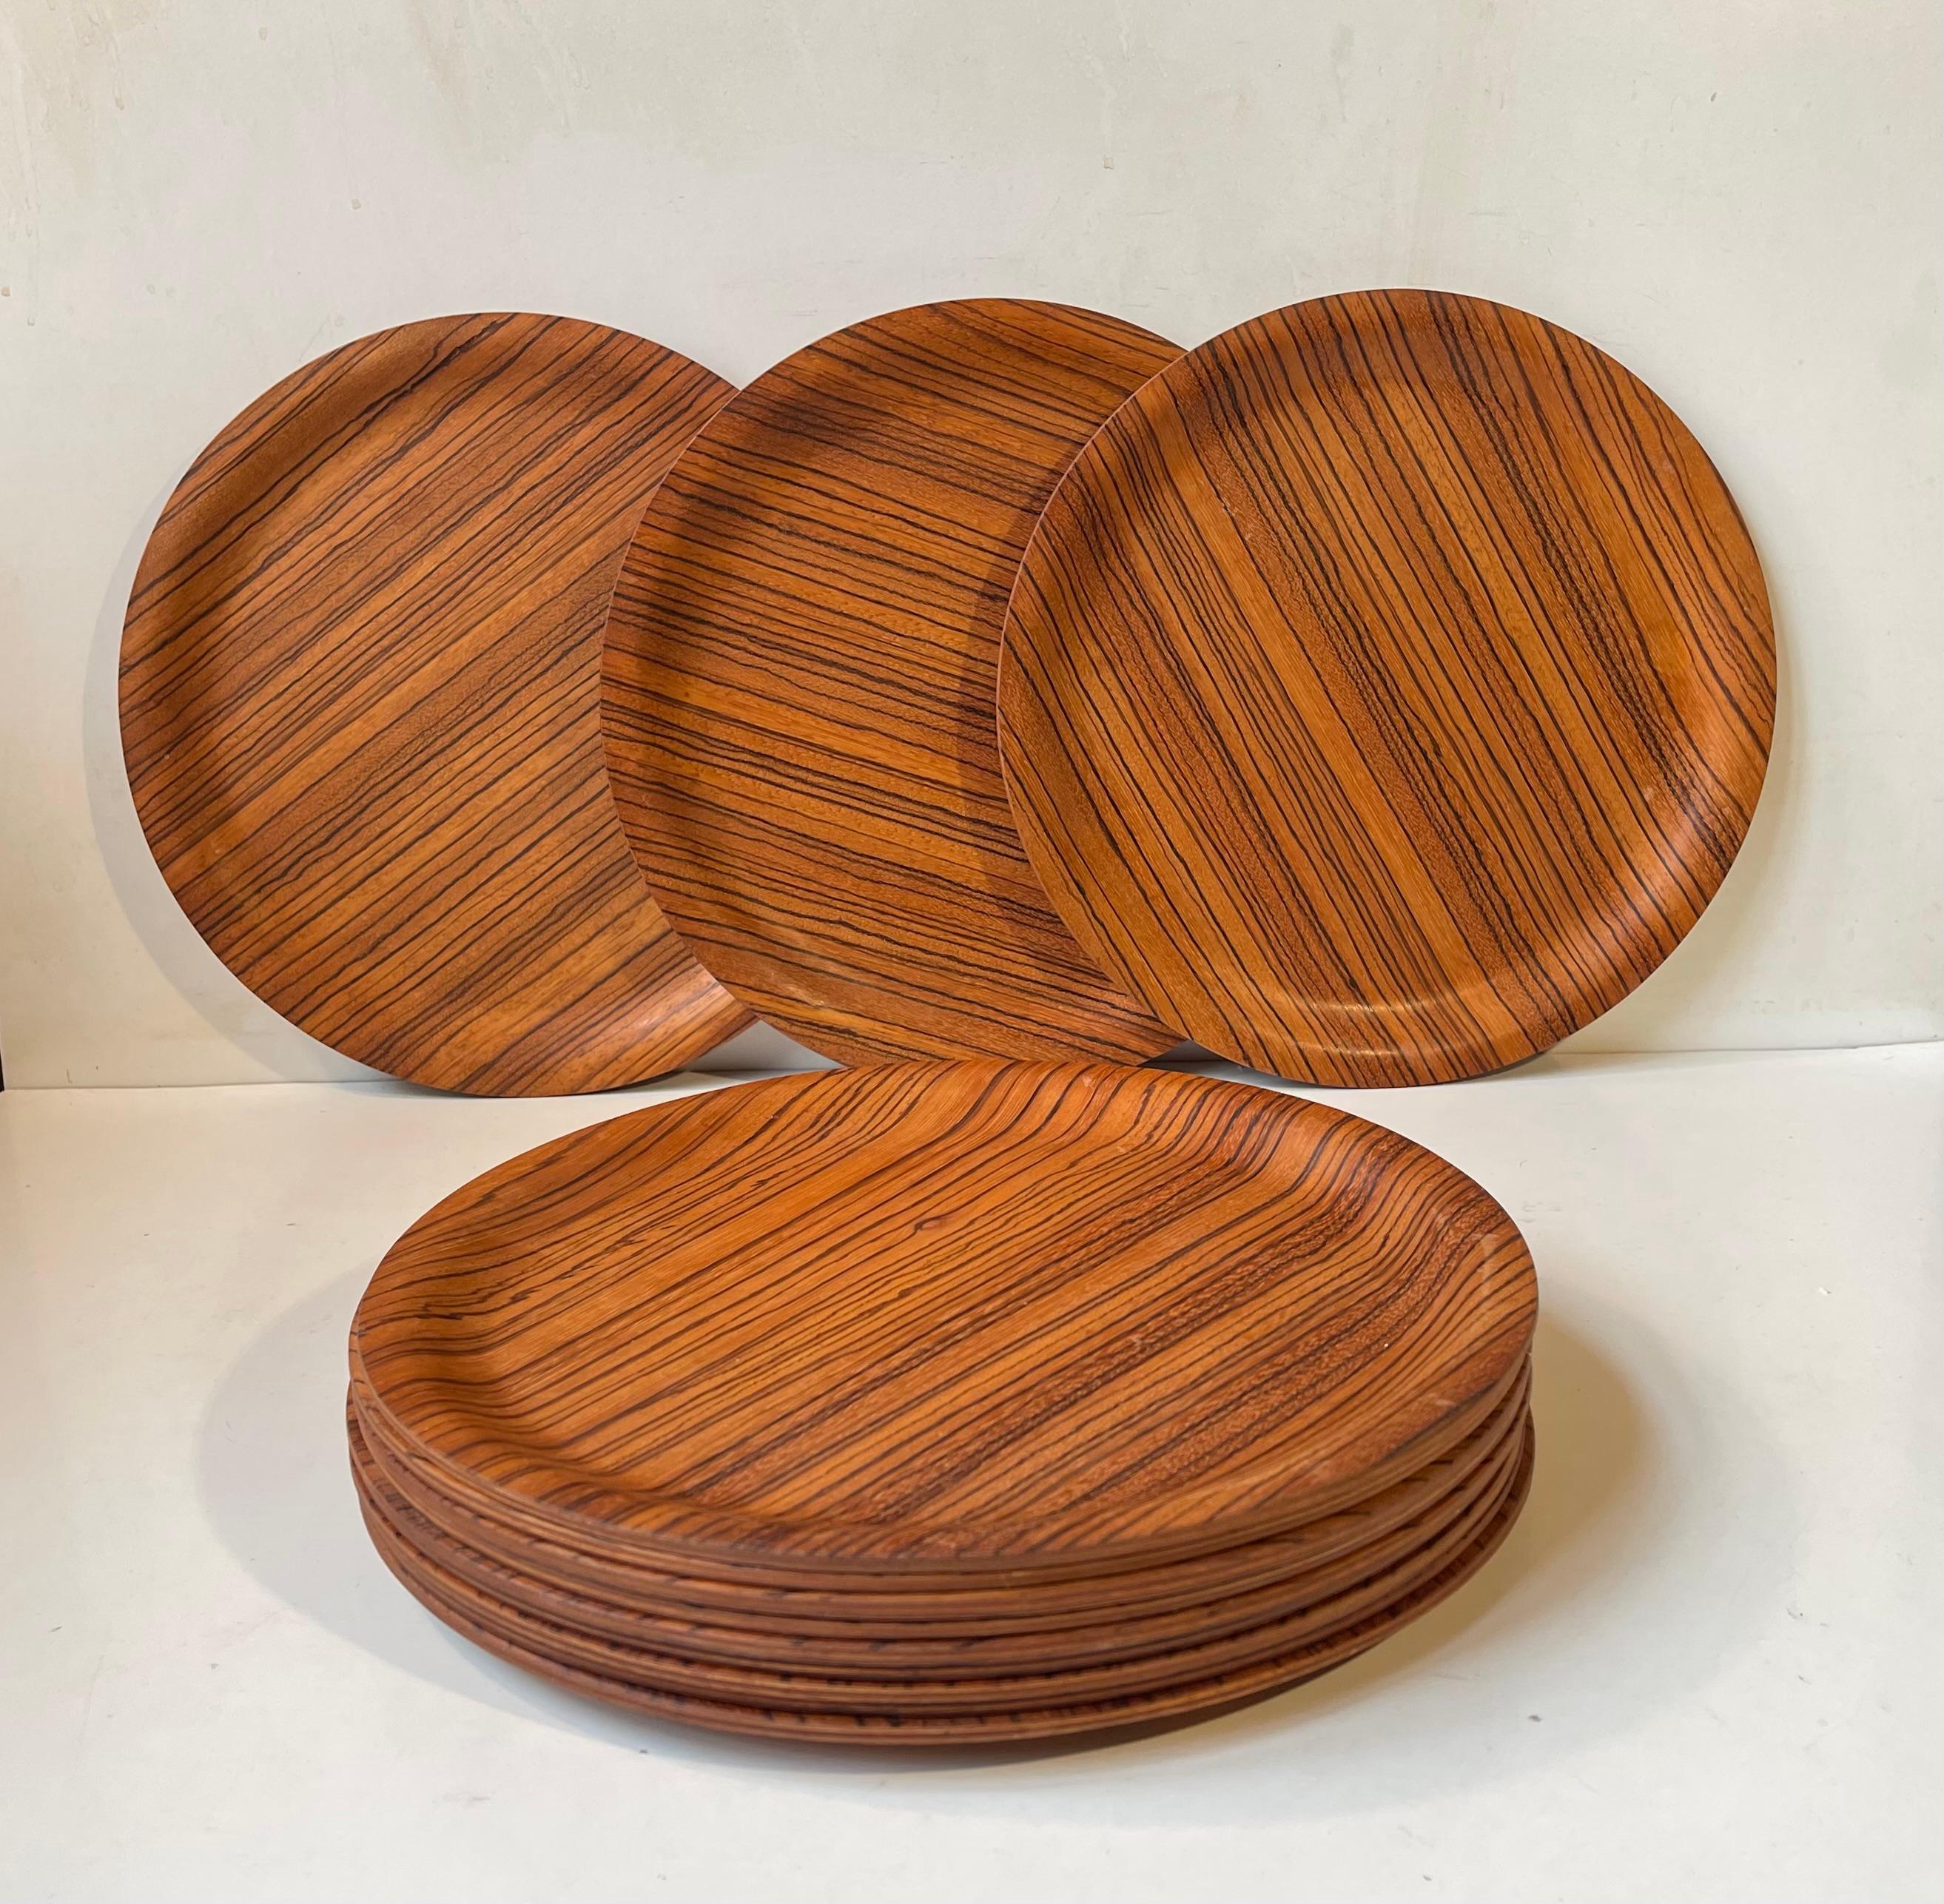 A complete set of 12 plates or cover plates made from zebra wood (Astronium graveolens). The plates were possibly commissioned by Illums Bolighus in Copenhagen and designed by Laust Jensen in the mid 1960s. This however remains unproved.